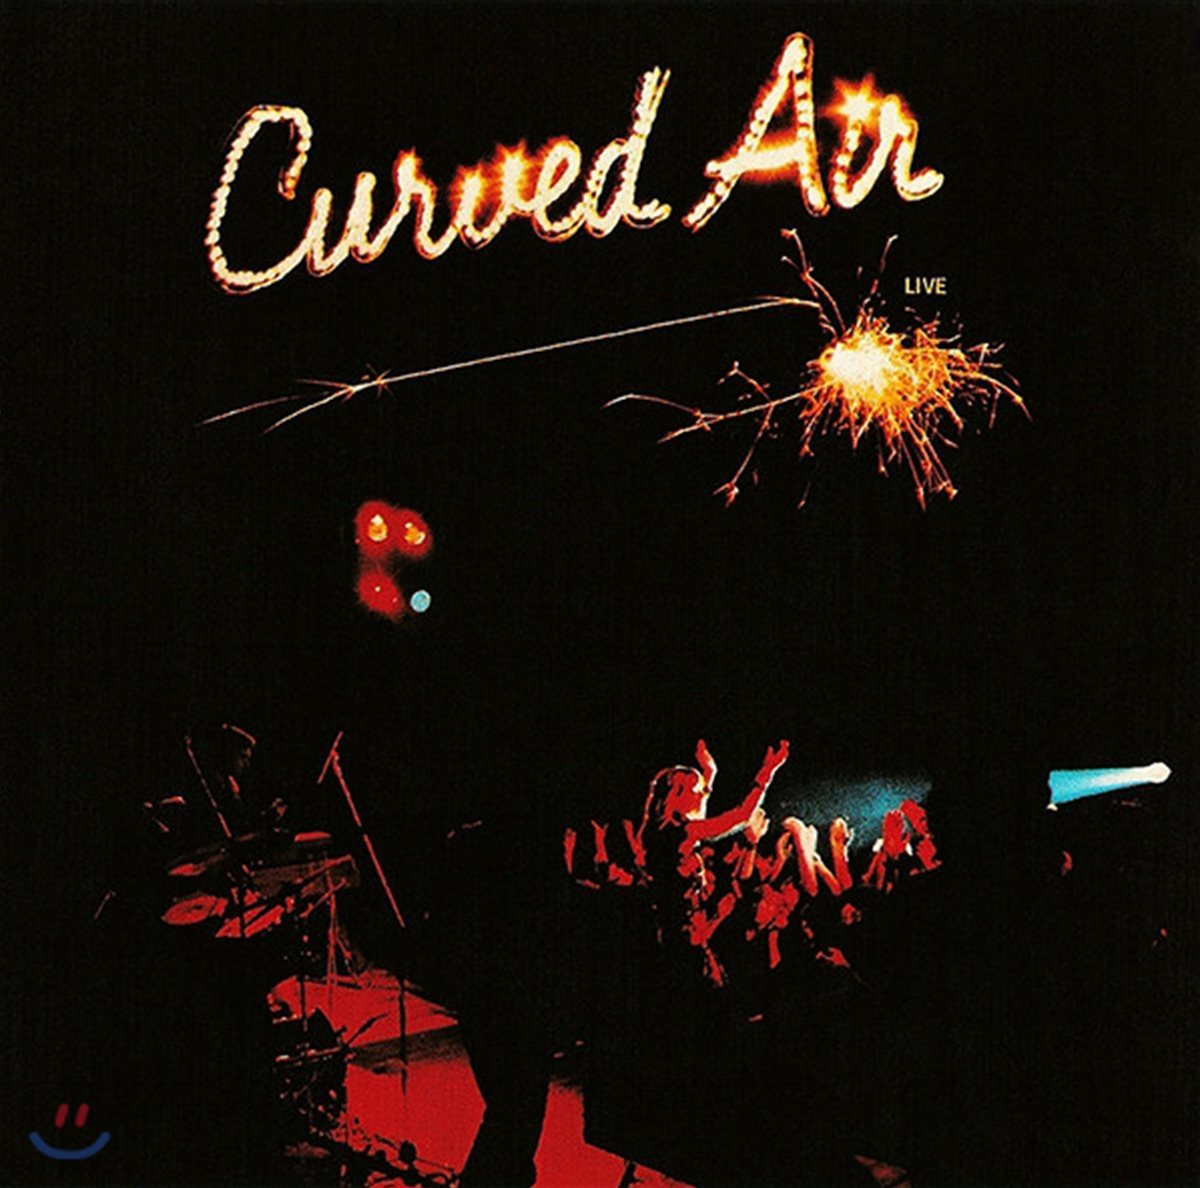 Curved air - Live